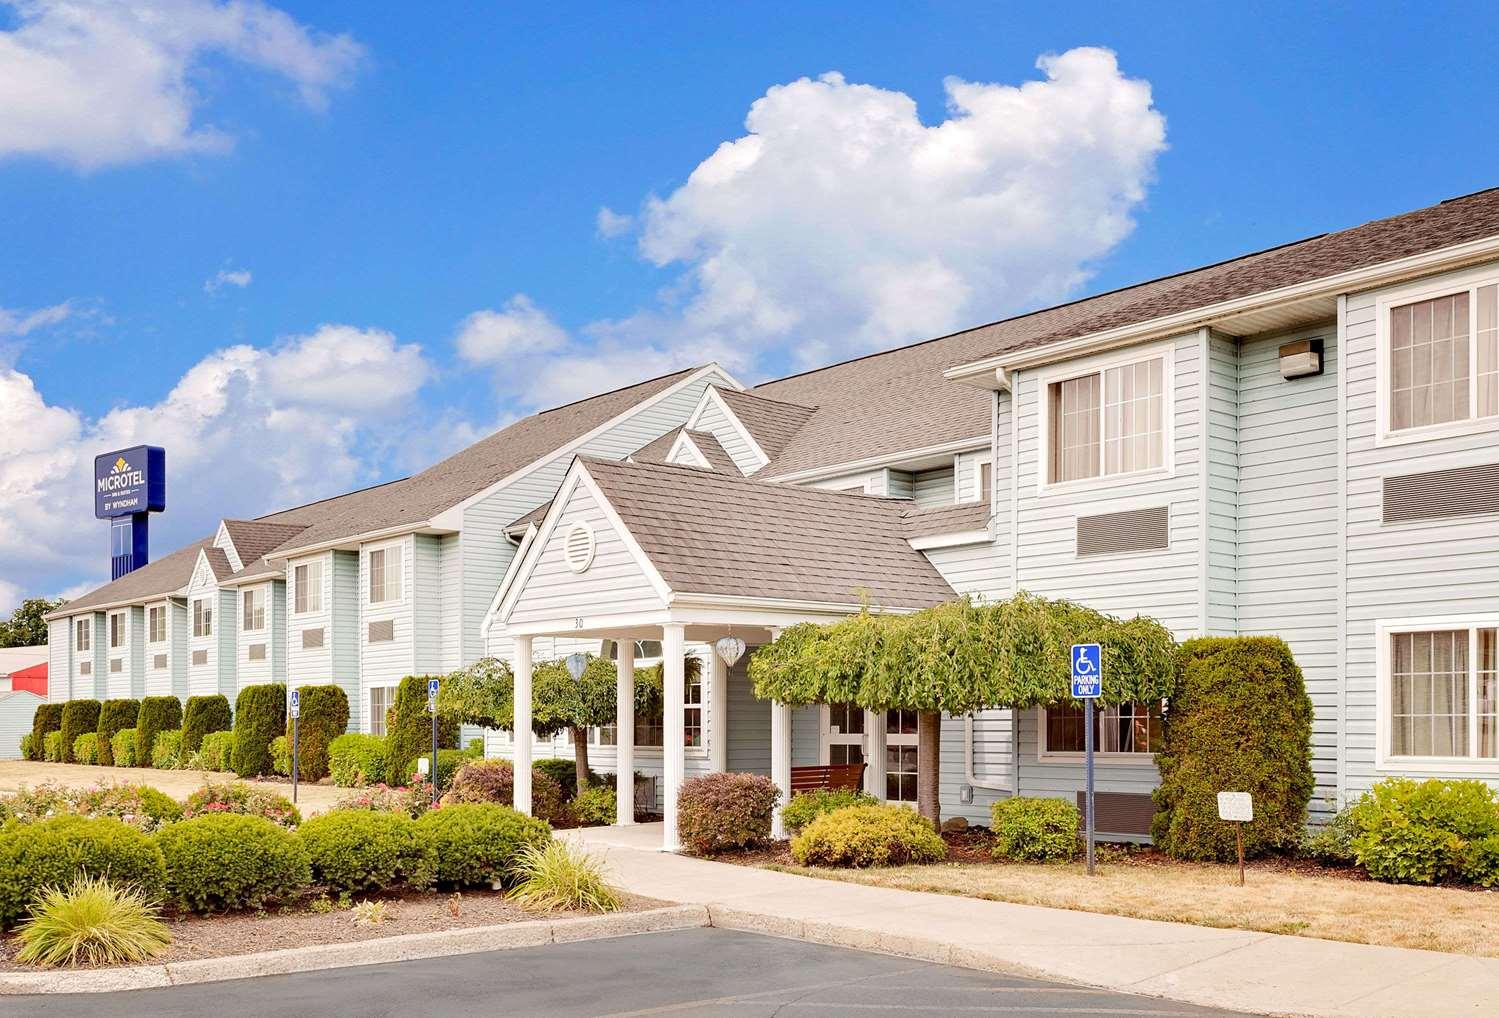 Microtel Inn & Suites by Wyndham Wellsville in Wellsville, NY